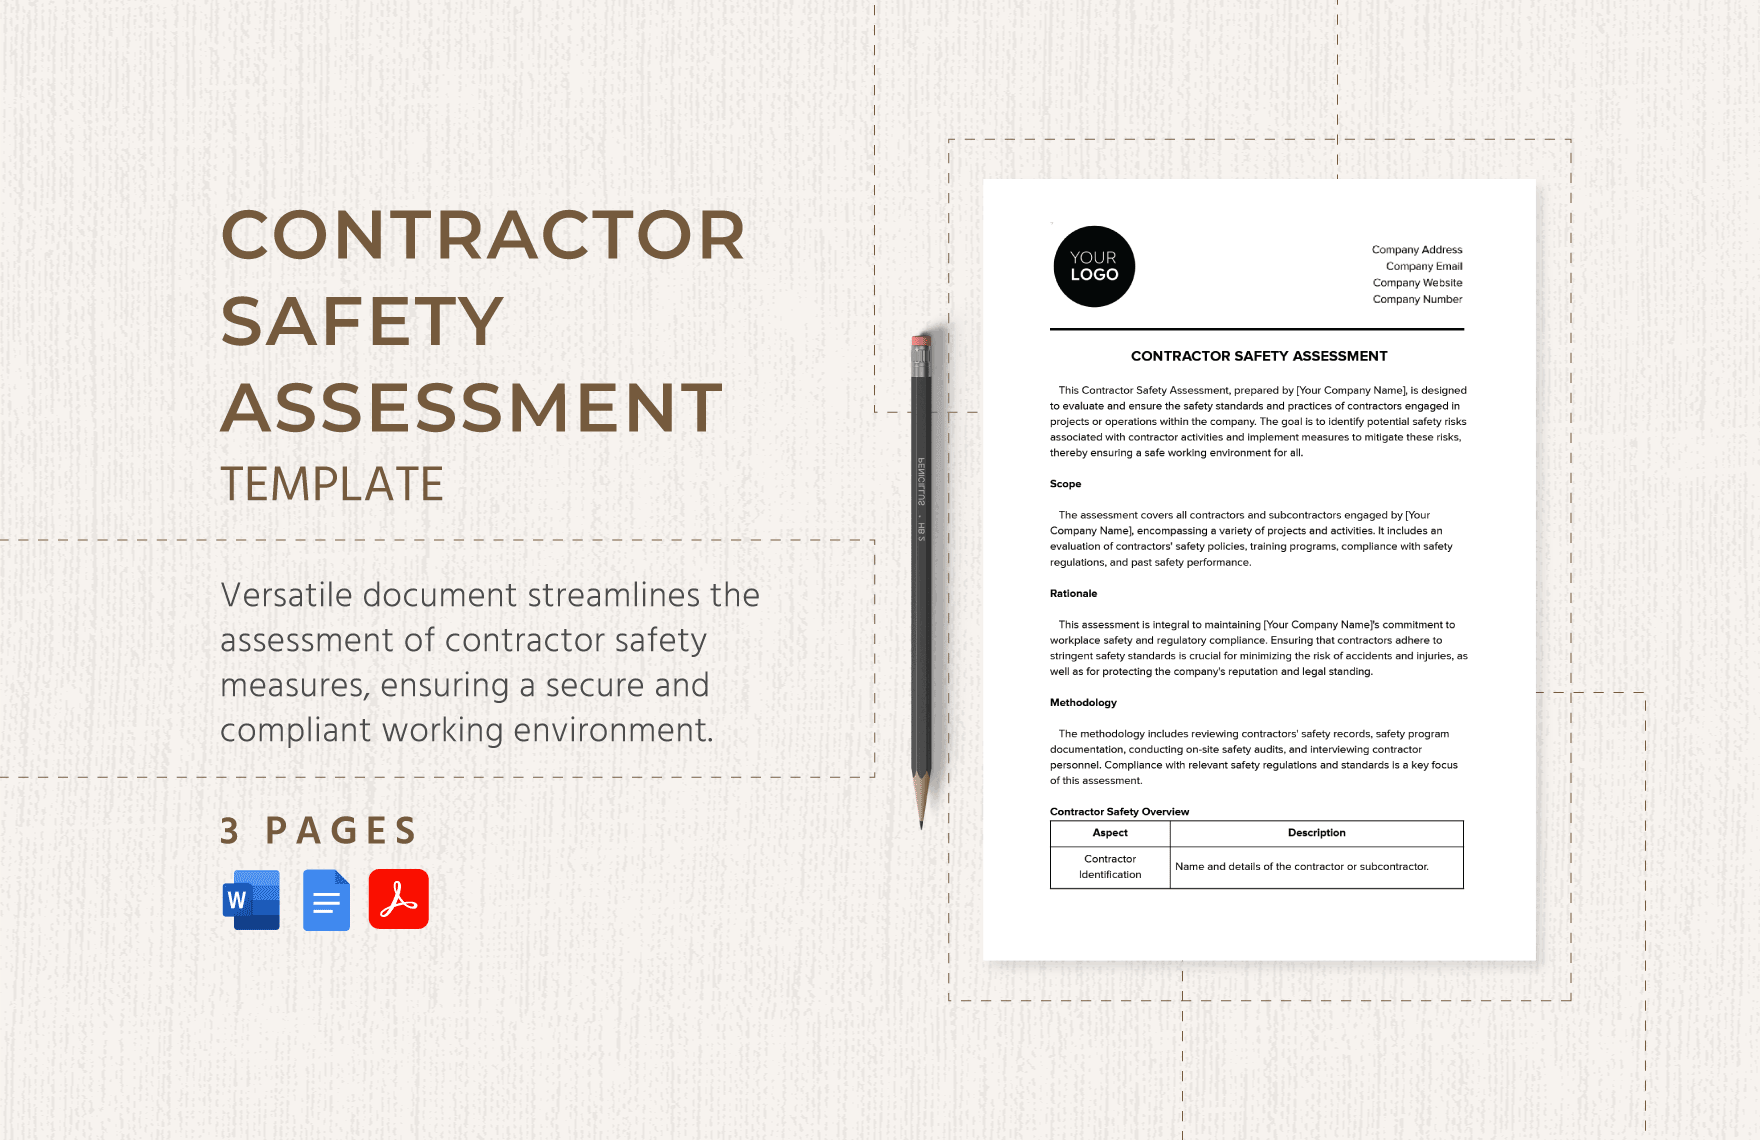 Contractor Safety Assessment Template in Word, Google Docs, PDF